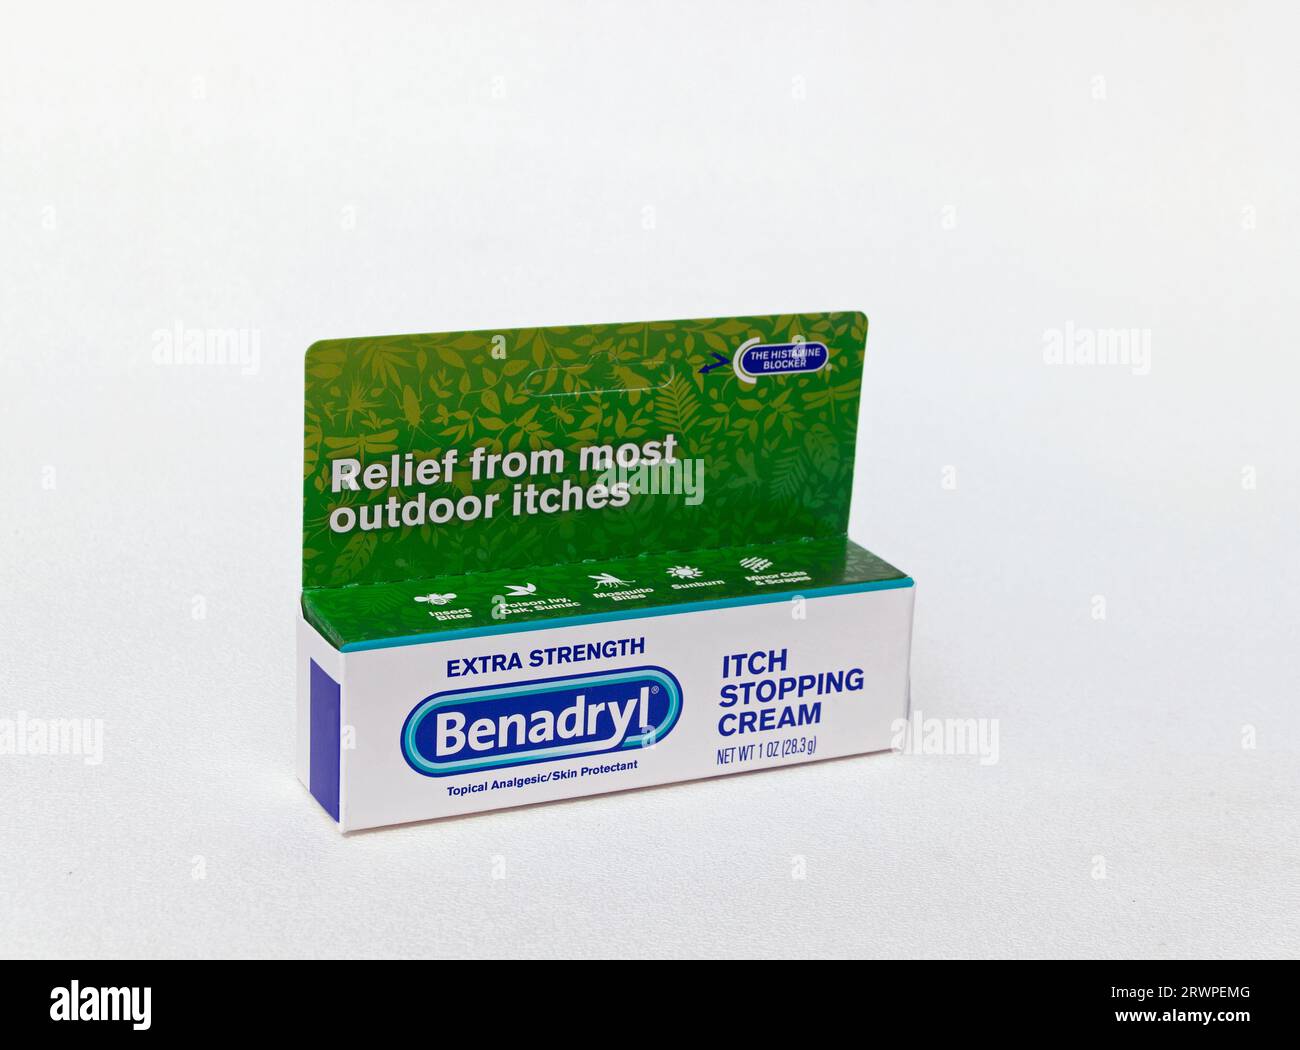 Benadryl Itch Stopping Cream, an over-the-counter topical analgesic & histamine blocker for bites, rashes, burns, sunburn, cuts, scrapes, irritations. Stock Photo